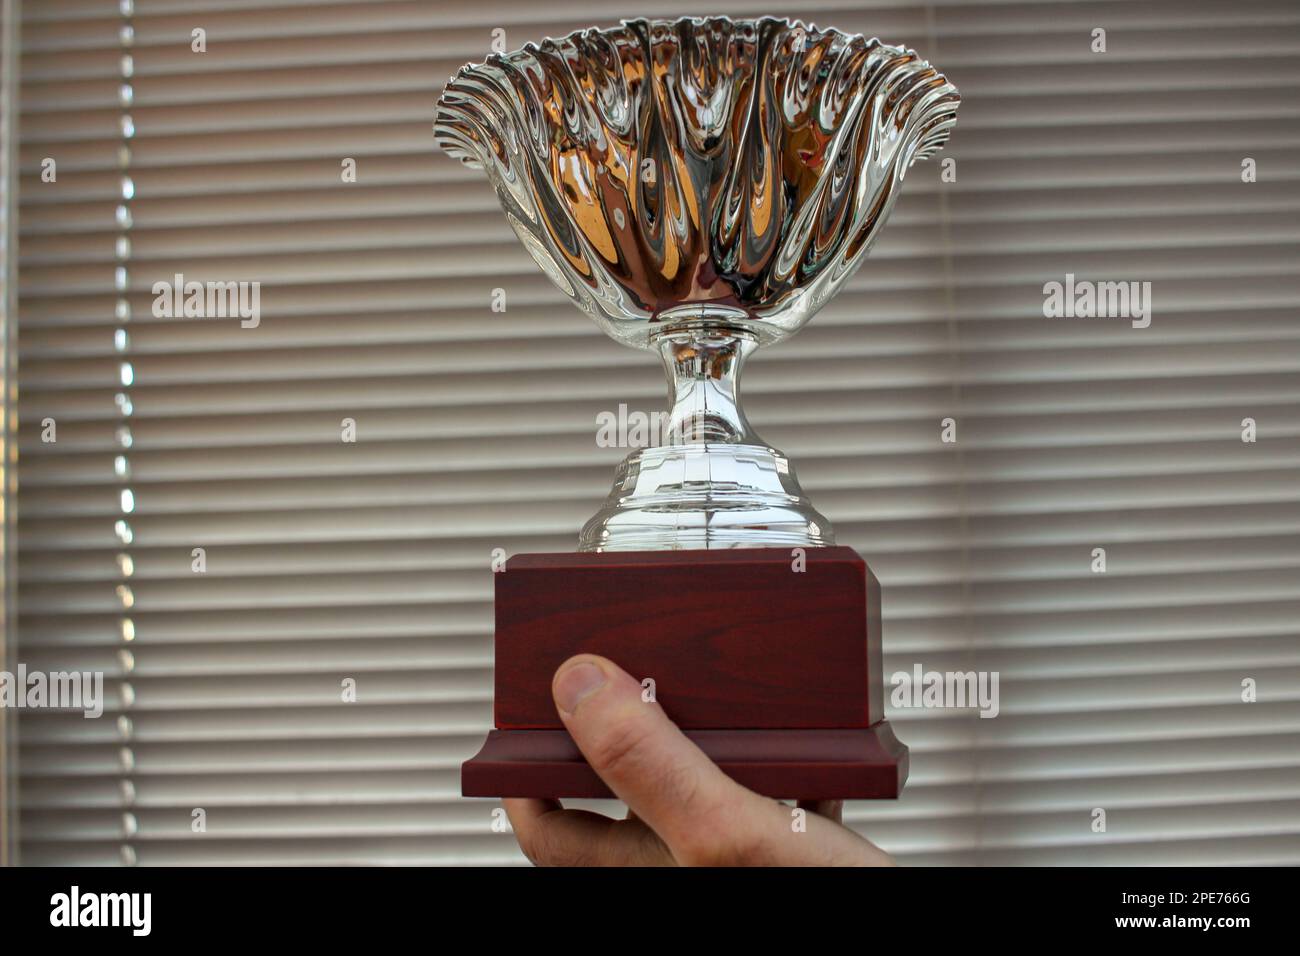 winning the trophy is possible if you do not give up Stock Photo